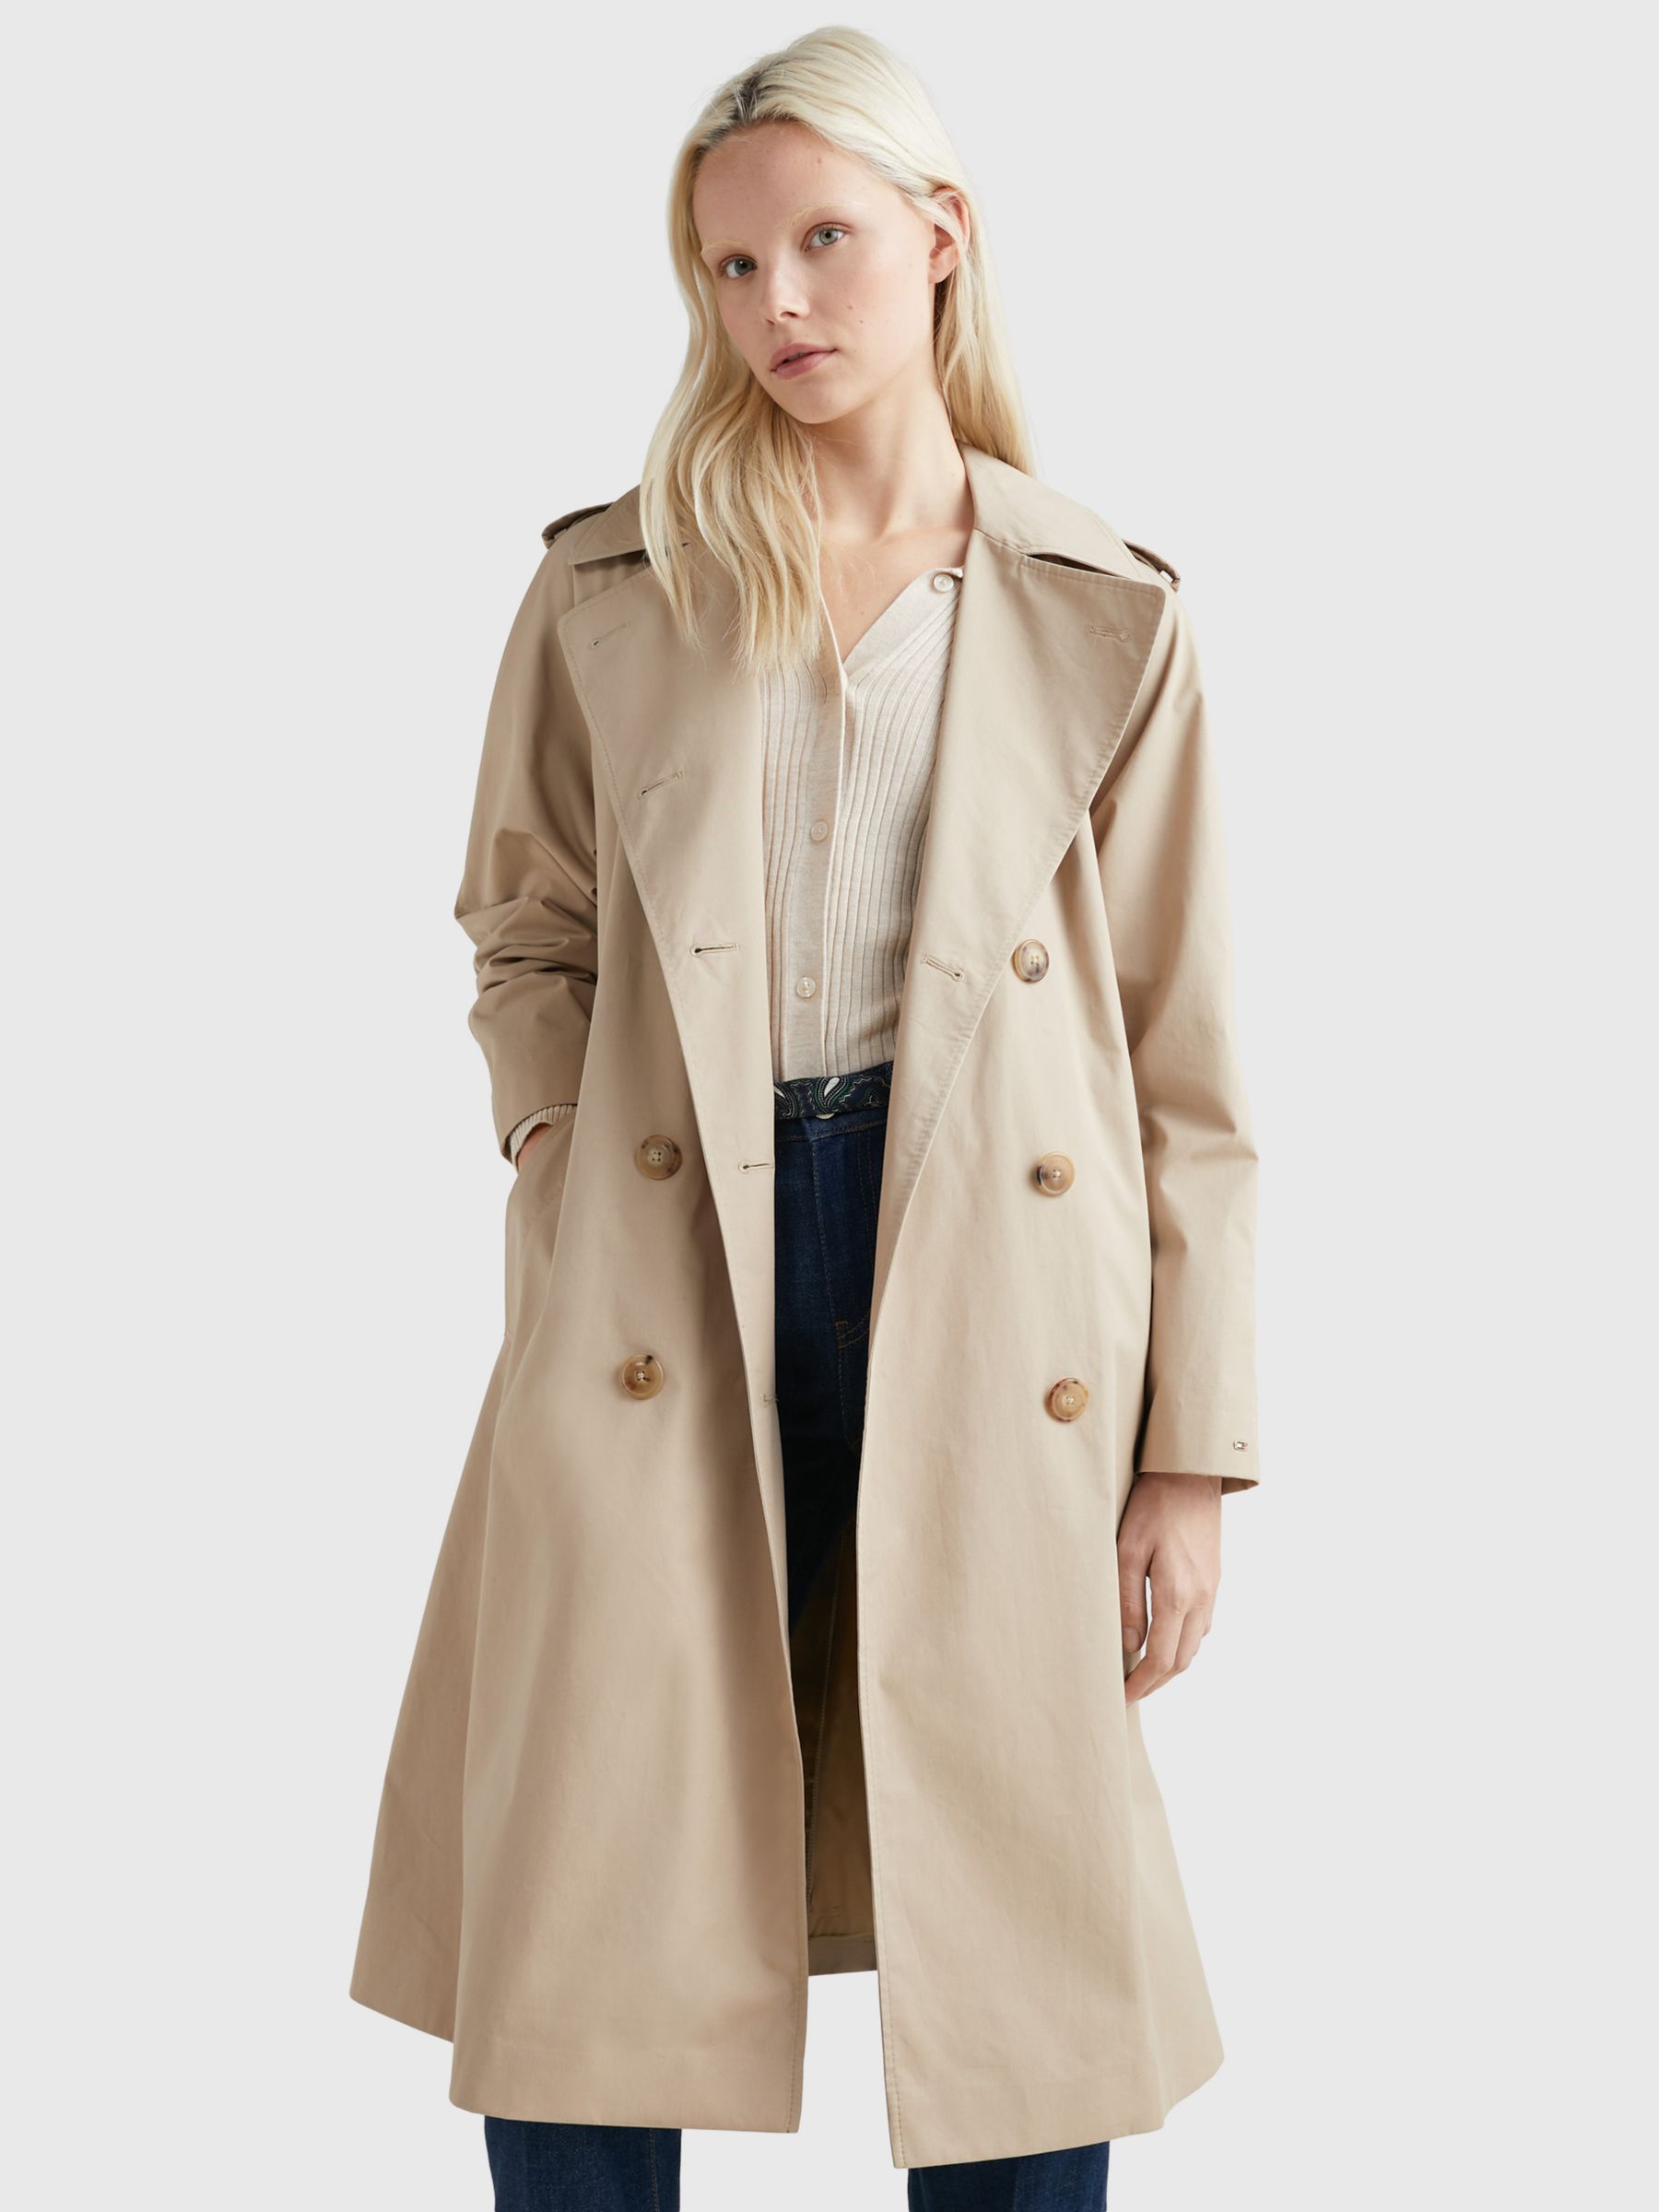 Tommy Hilfiger Organic Cotton Trench Coat at John Lewis & Partners